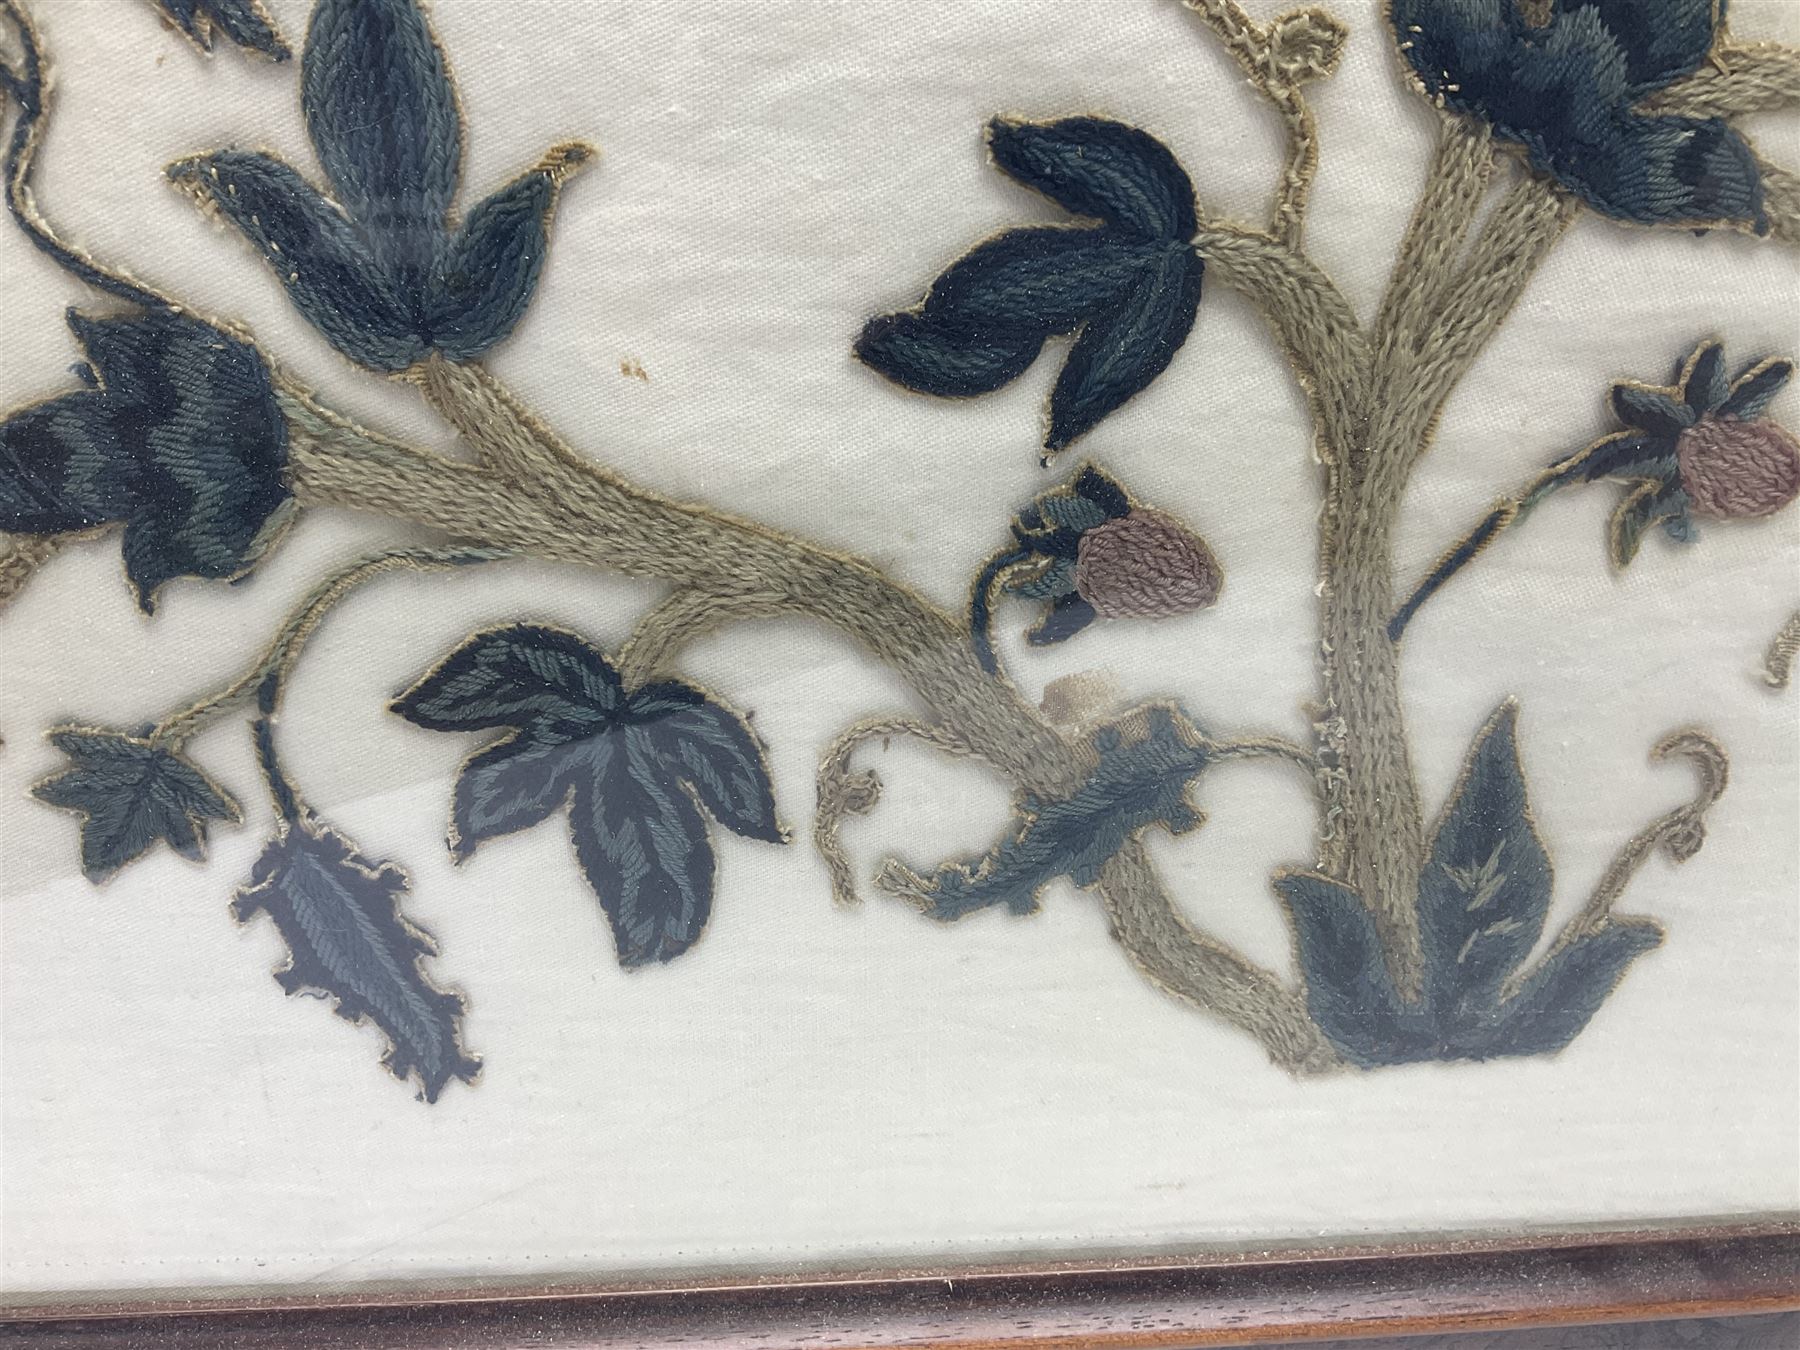 Framed crewelwork embroidered panel - Image 8 of 10